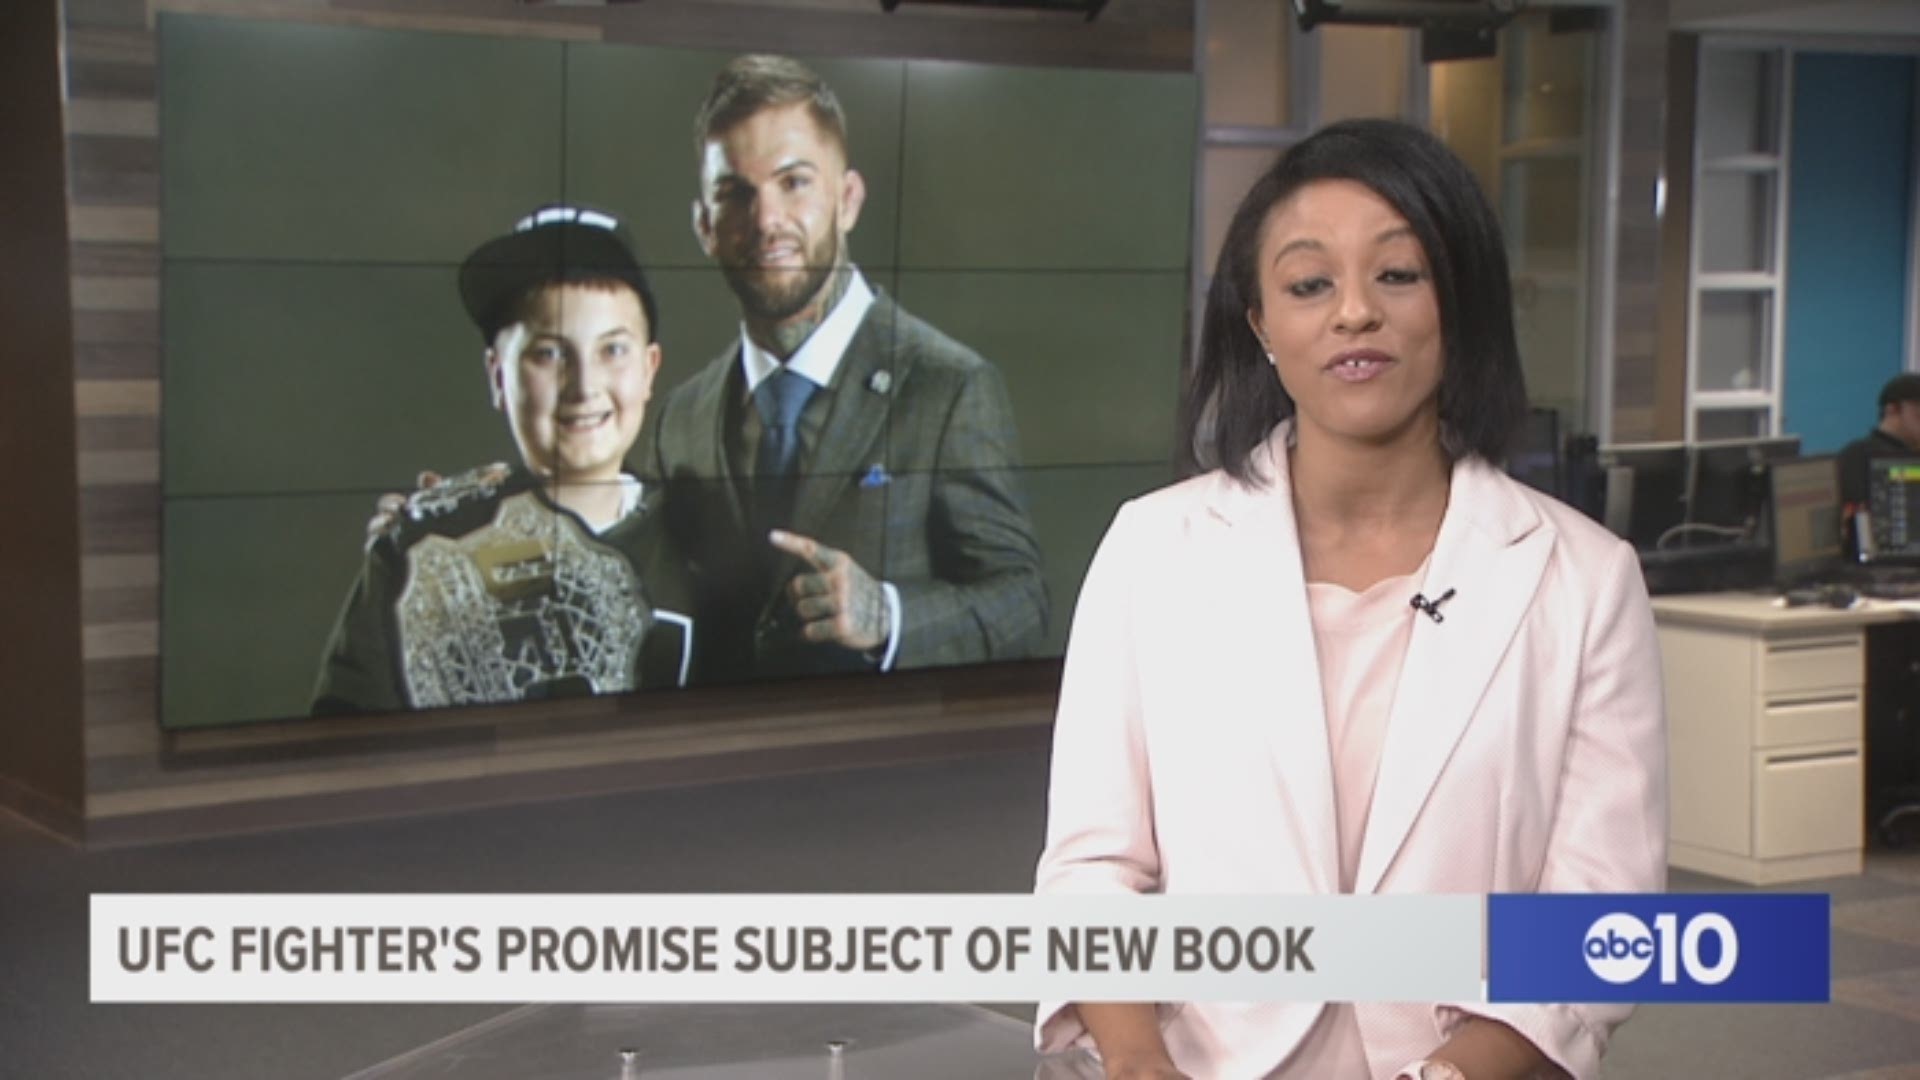 UFC bantamweight and former champion Cody Garbrandt, who lives and trains in Sacramento, sits down with ABC10's Sean Cunningham to discuss his new book "The Pact" - about the special bond he formed with his biggest fan Maddux Maple - who was battling leuk